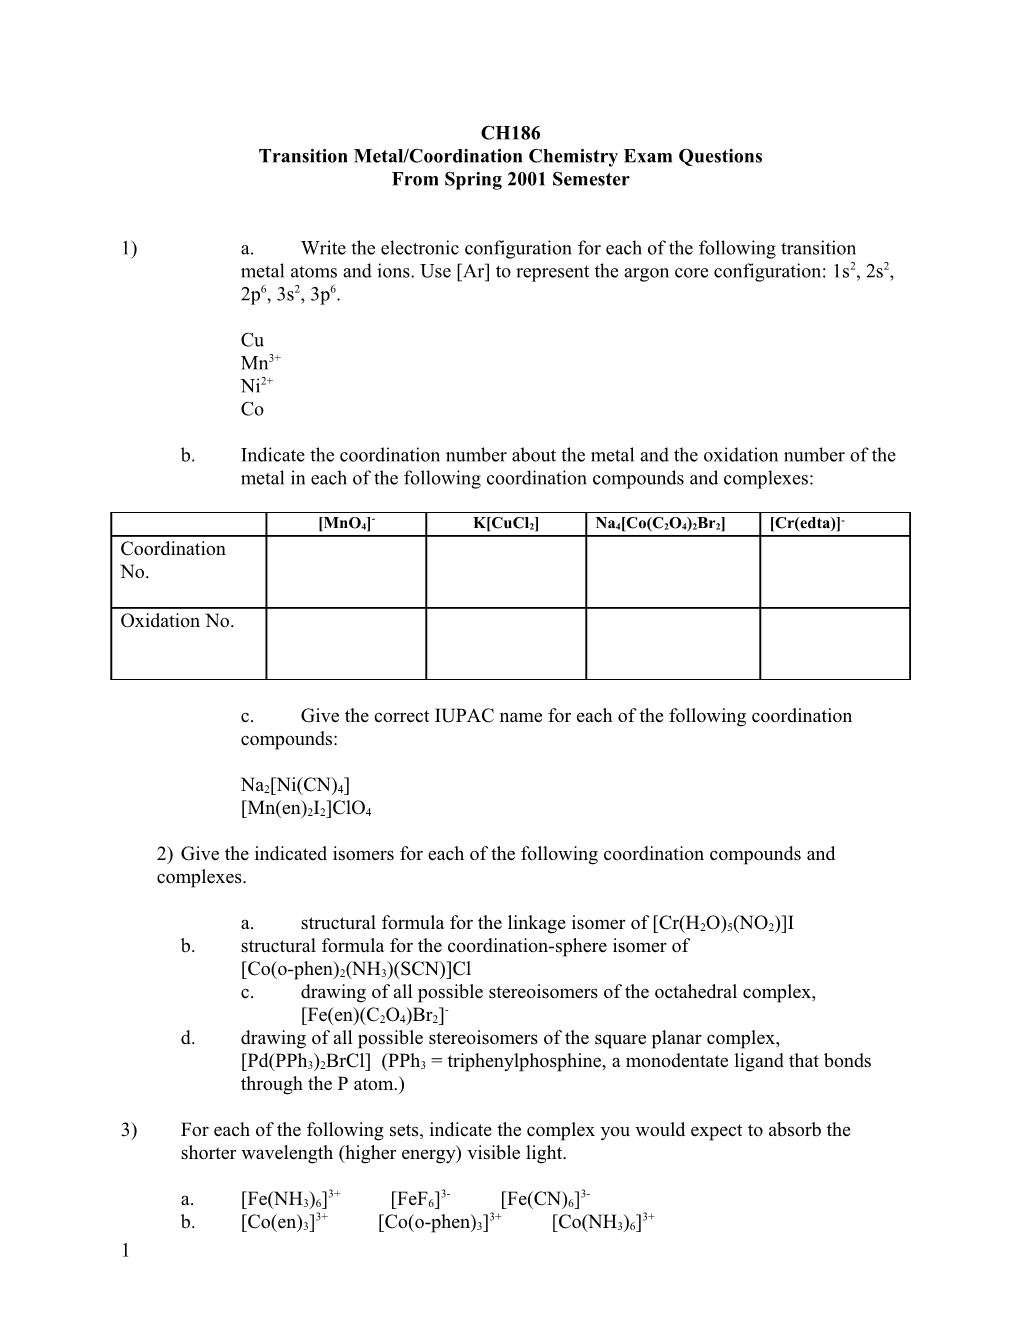 Transition Metal/Coordination Chemistry Exam Questions